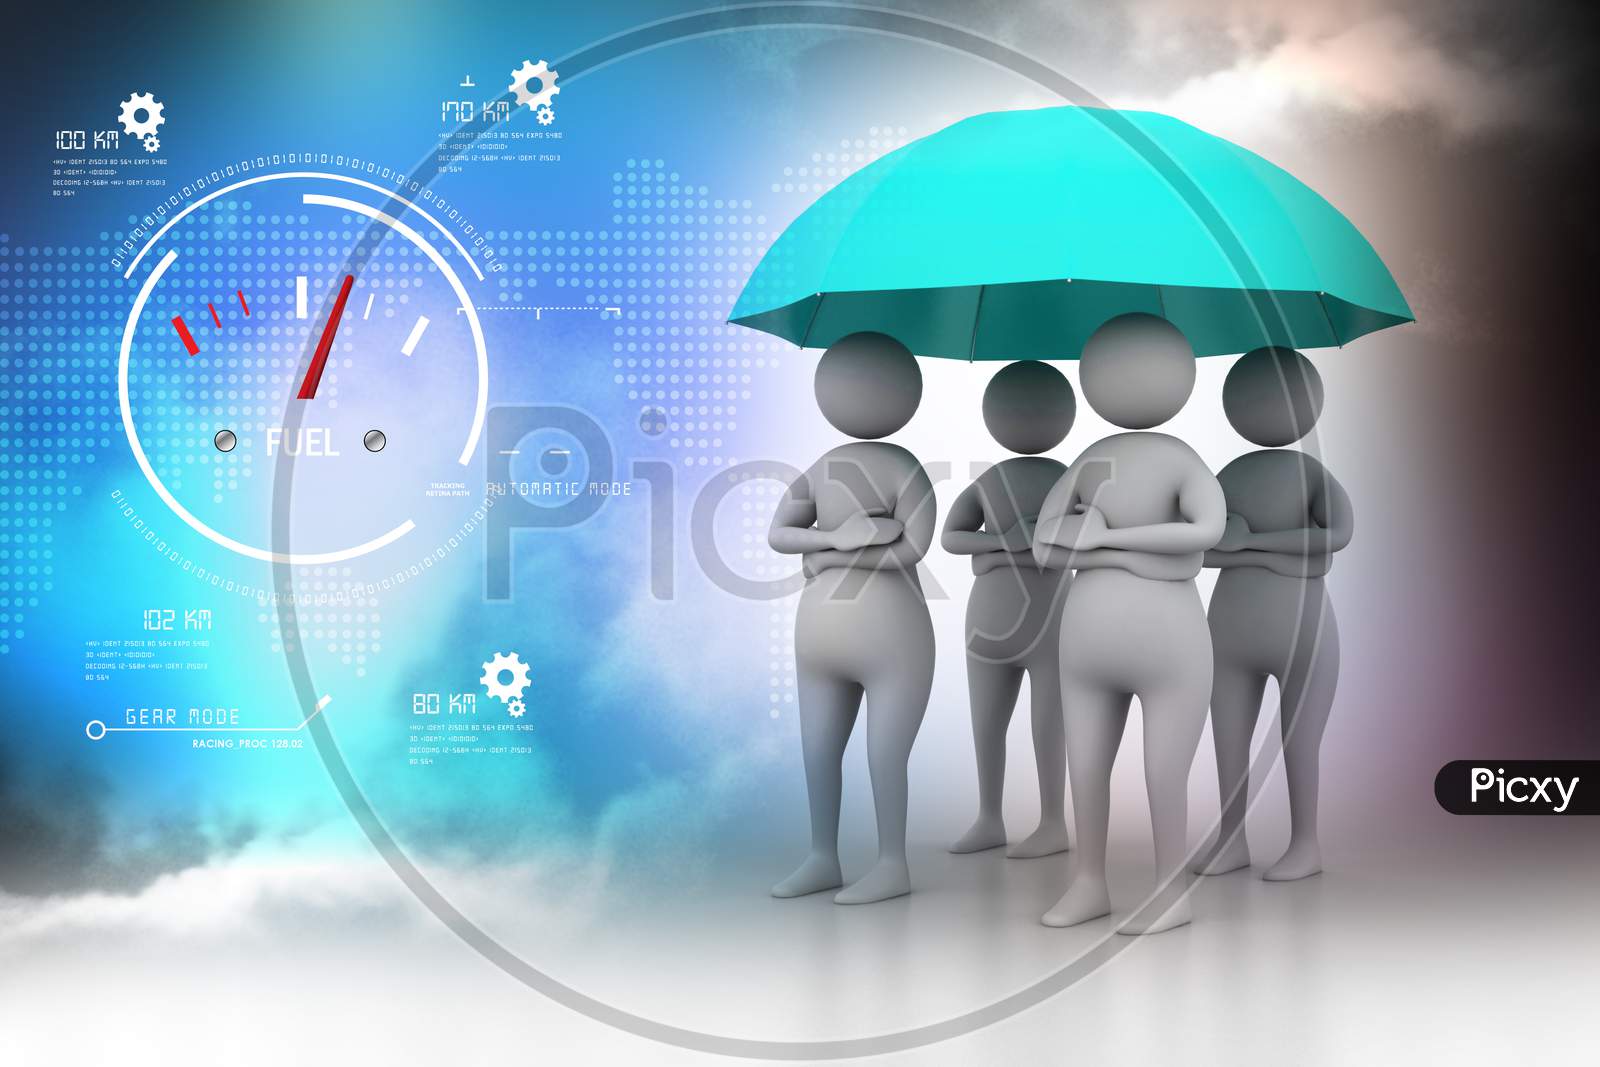 A Couple of 3D People under an Umbrella